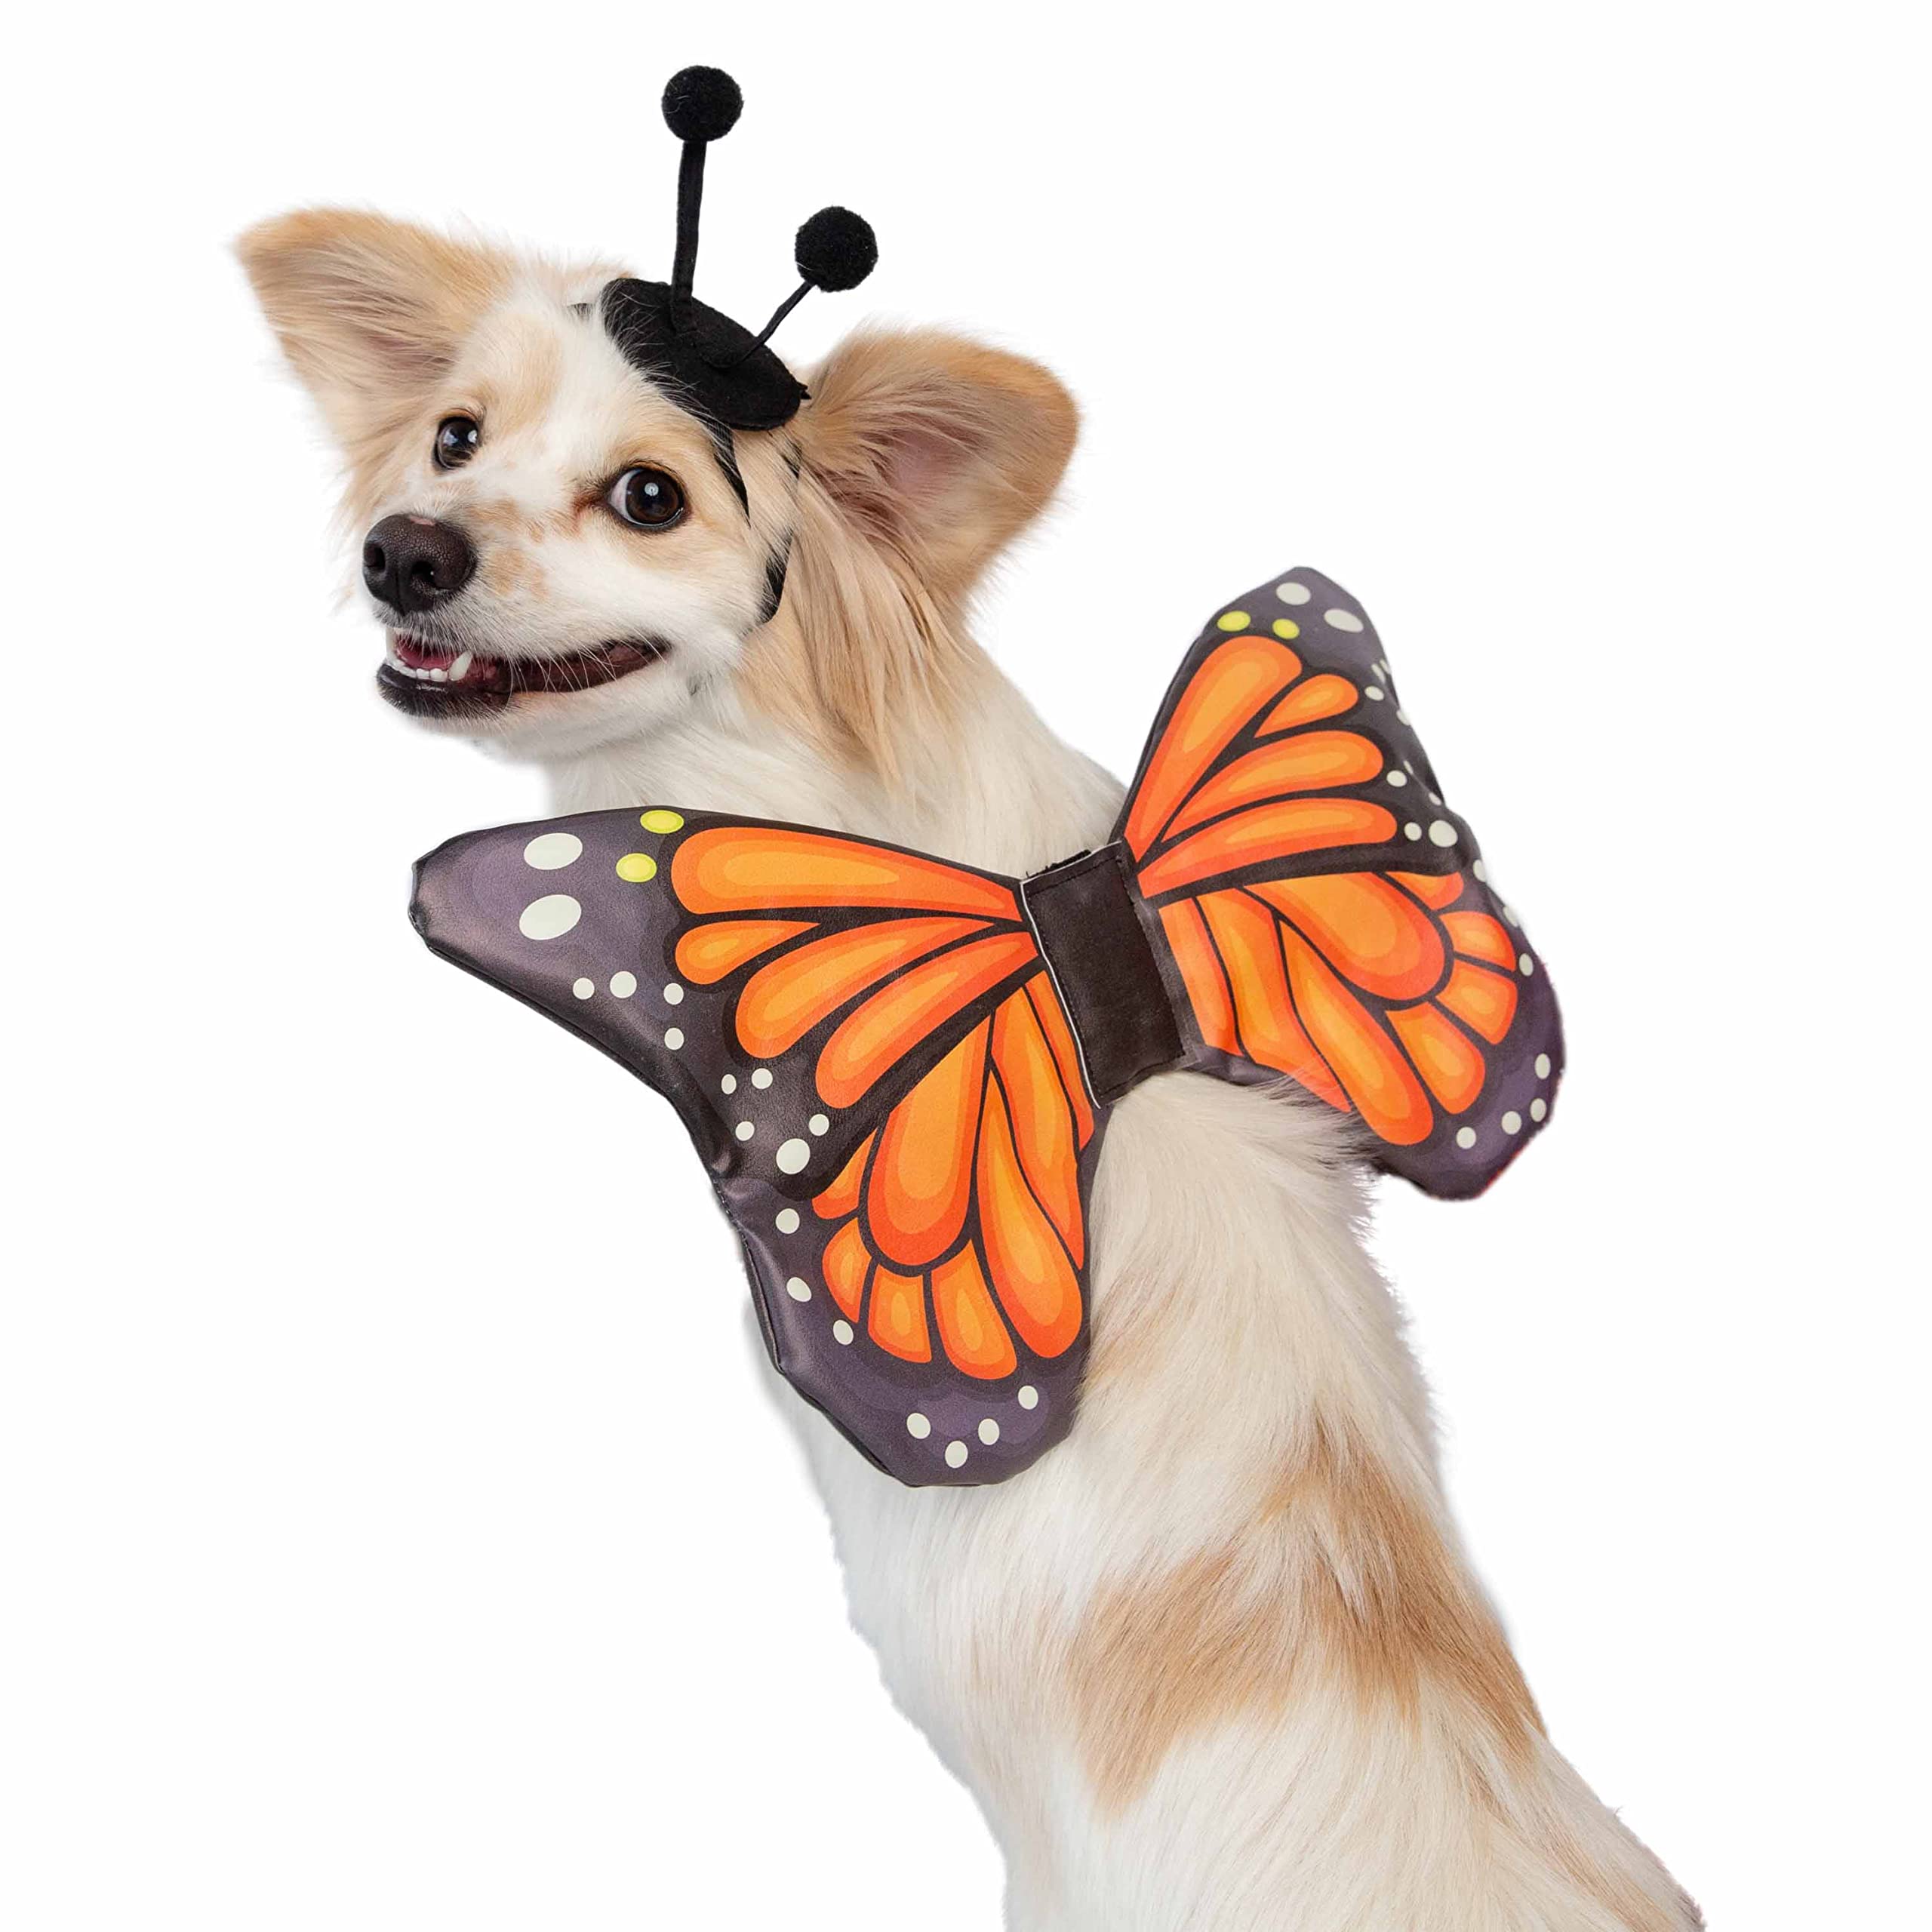 Pet Krewe Butterfly Costume - Butterfly Wings Costume for Pets - Harness Attachment, One Size Fits All - Perfect for Halloween, Christmas Holiday, Parties, Photoshoots, Gifts for Dog Lovers